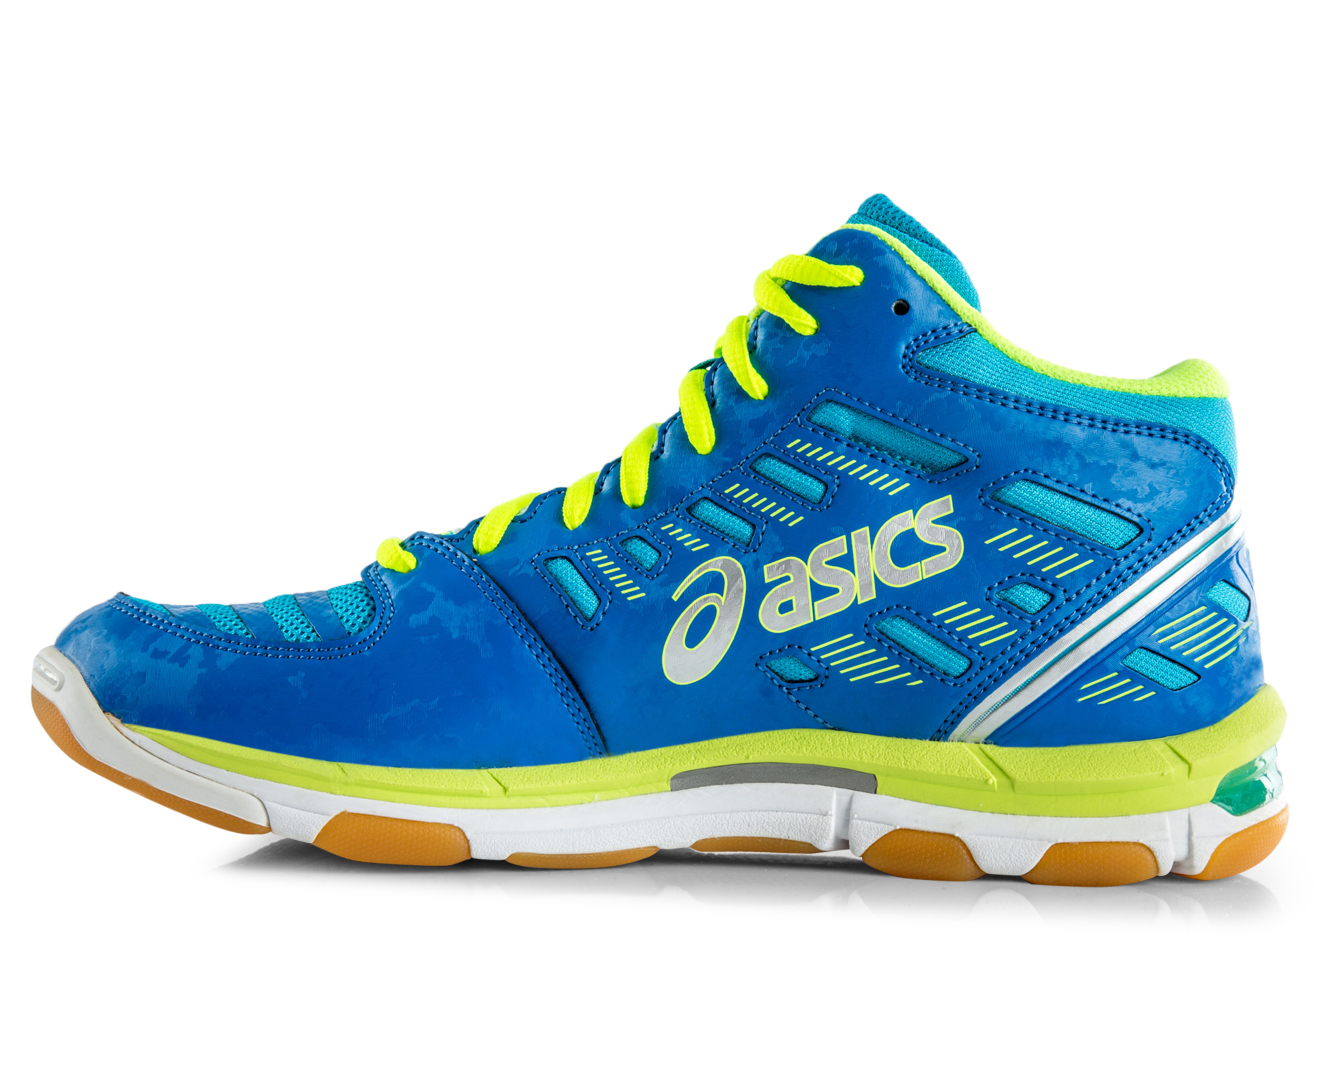 Buy asics gel cyber shot \u003e Up to OFF65% Discounted